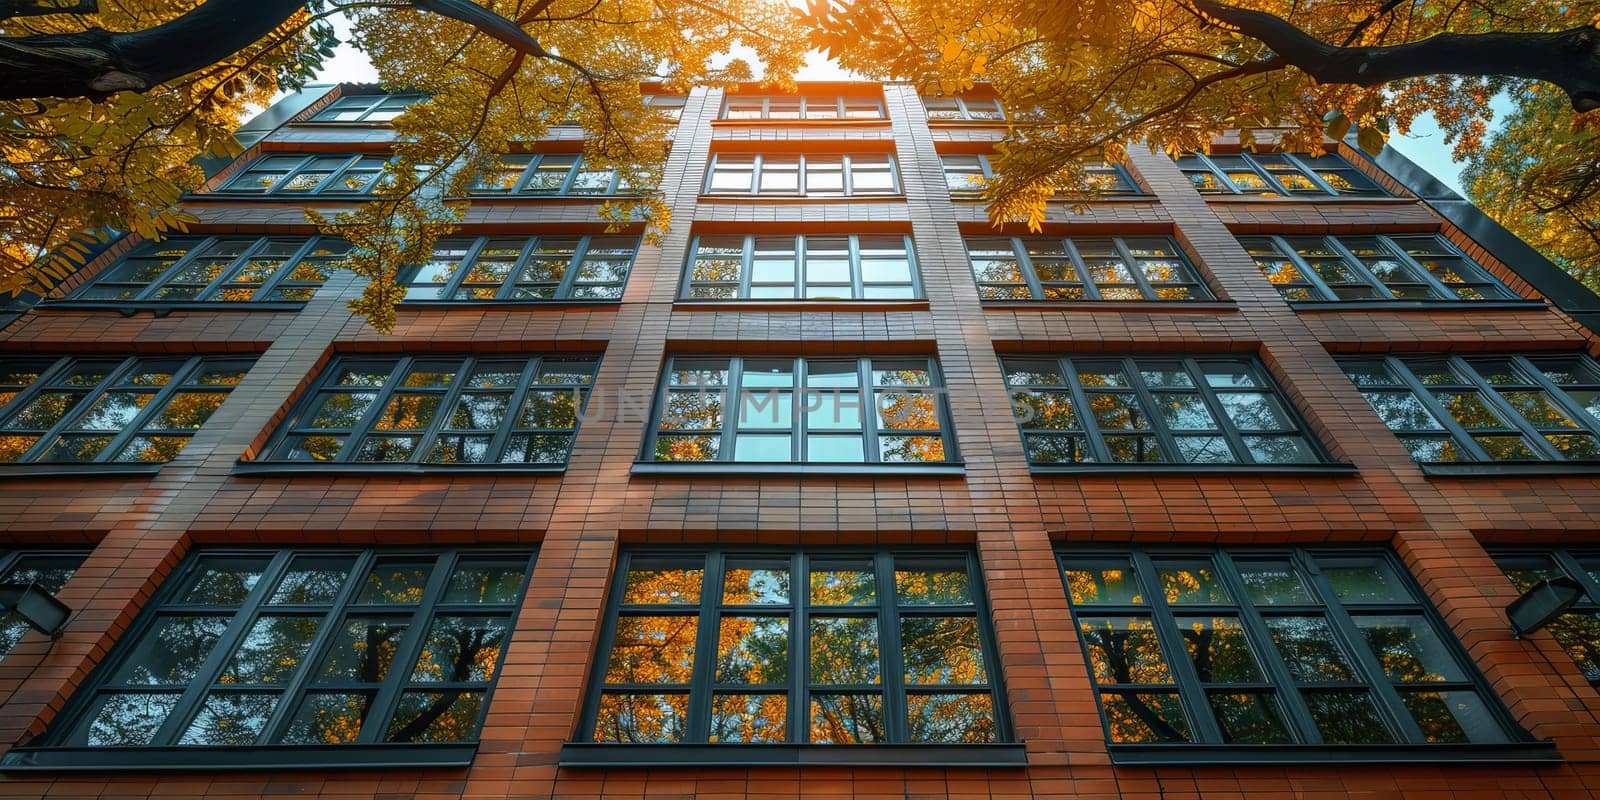 Facade of a modern building in the fall with yellow leaves.